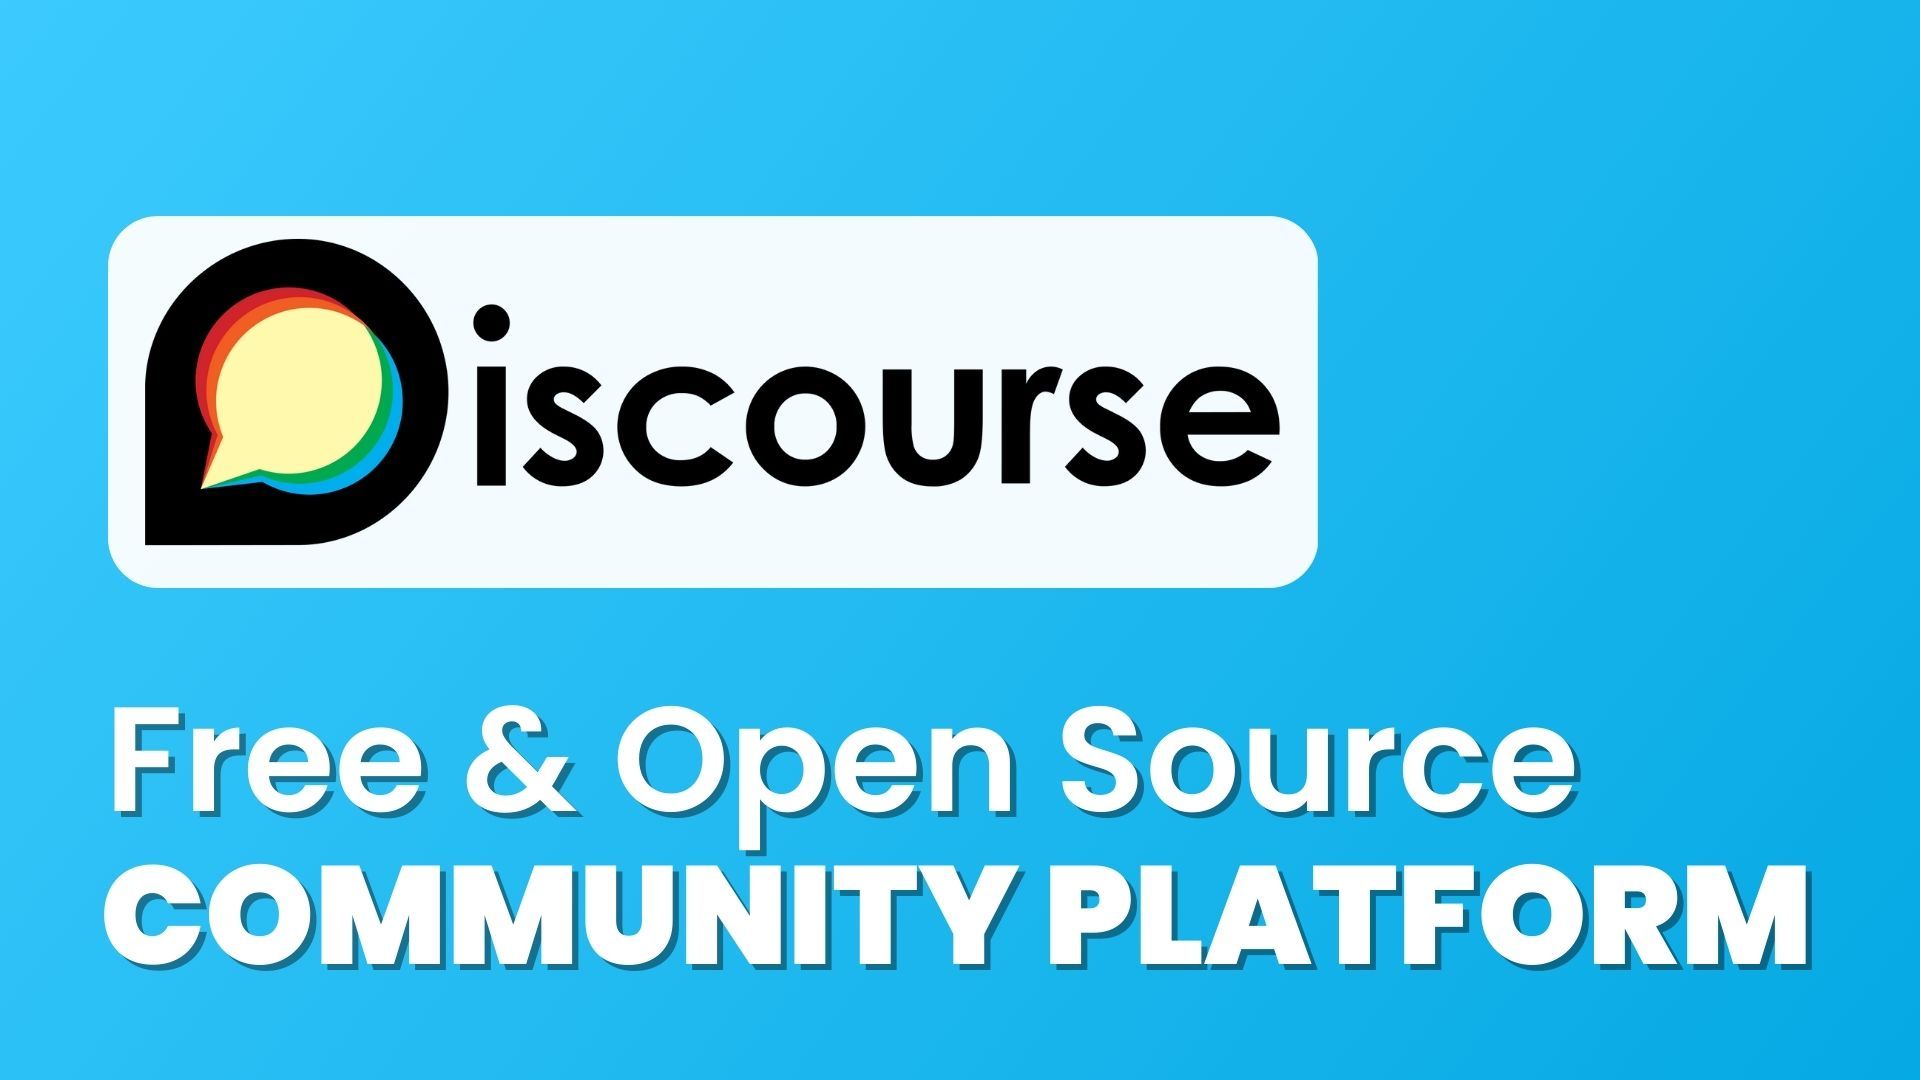 Build & engage your community with Discourse